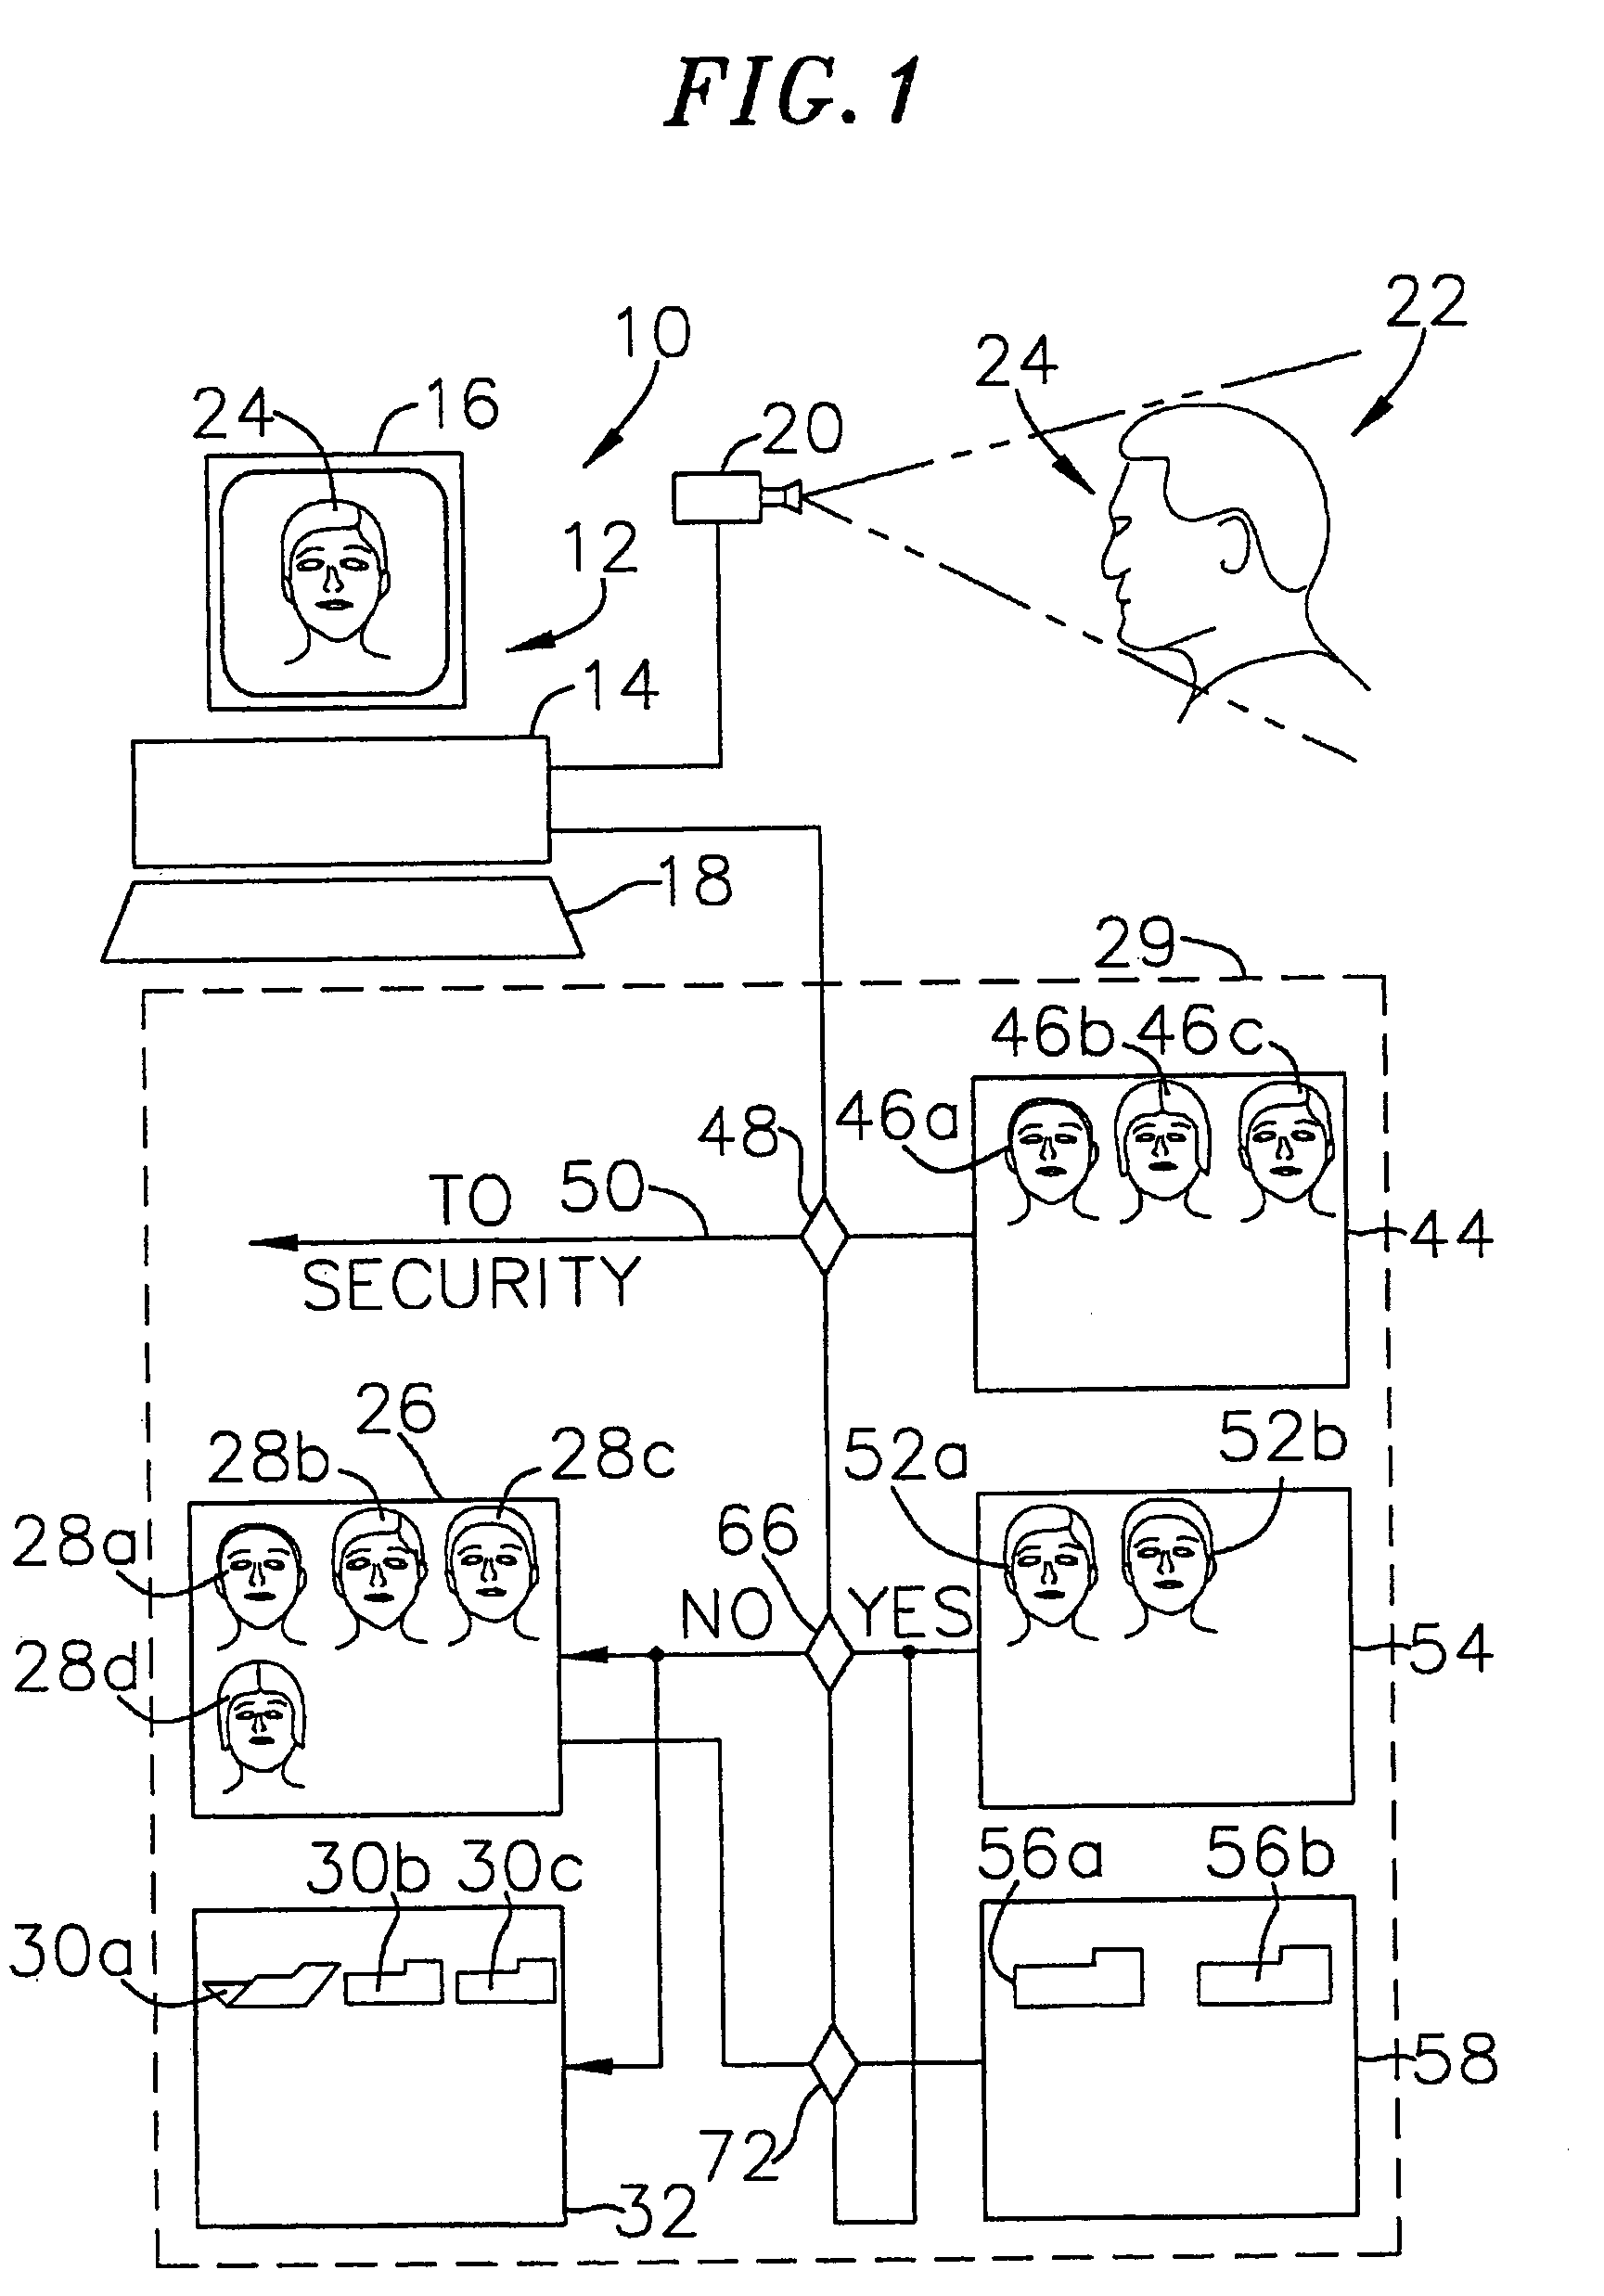 Apparatus and method for controlling and preventing compulsive gaming